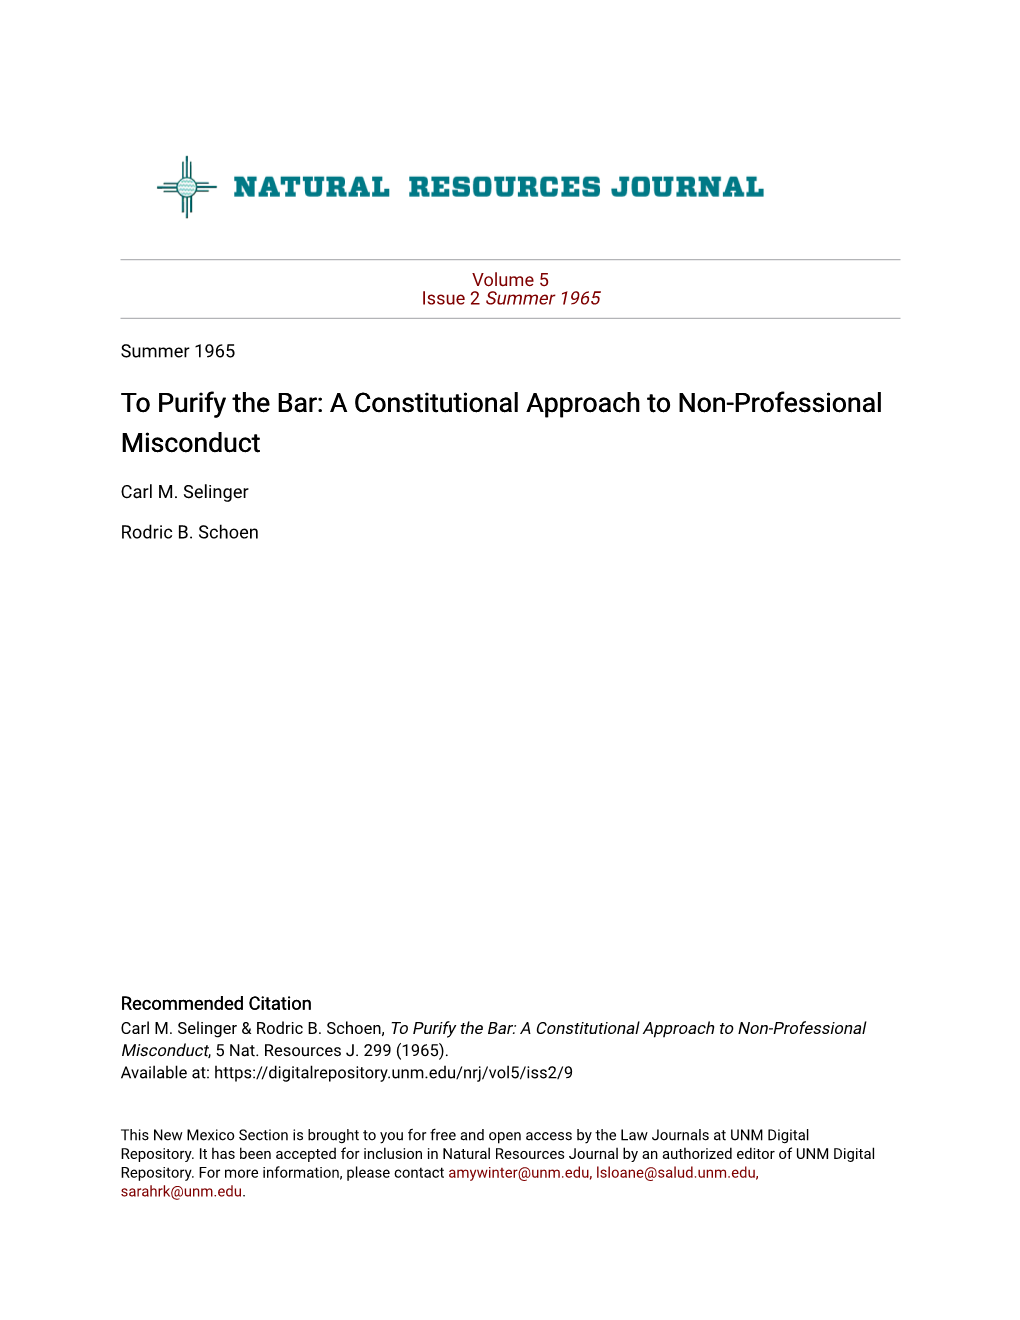 To Purify the Bar: a Constitutional Approach to Non-Professional Misconduct